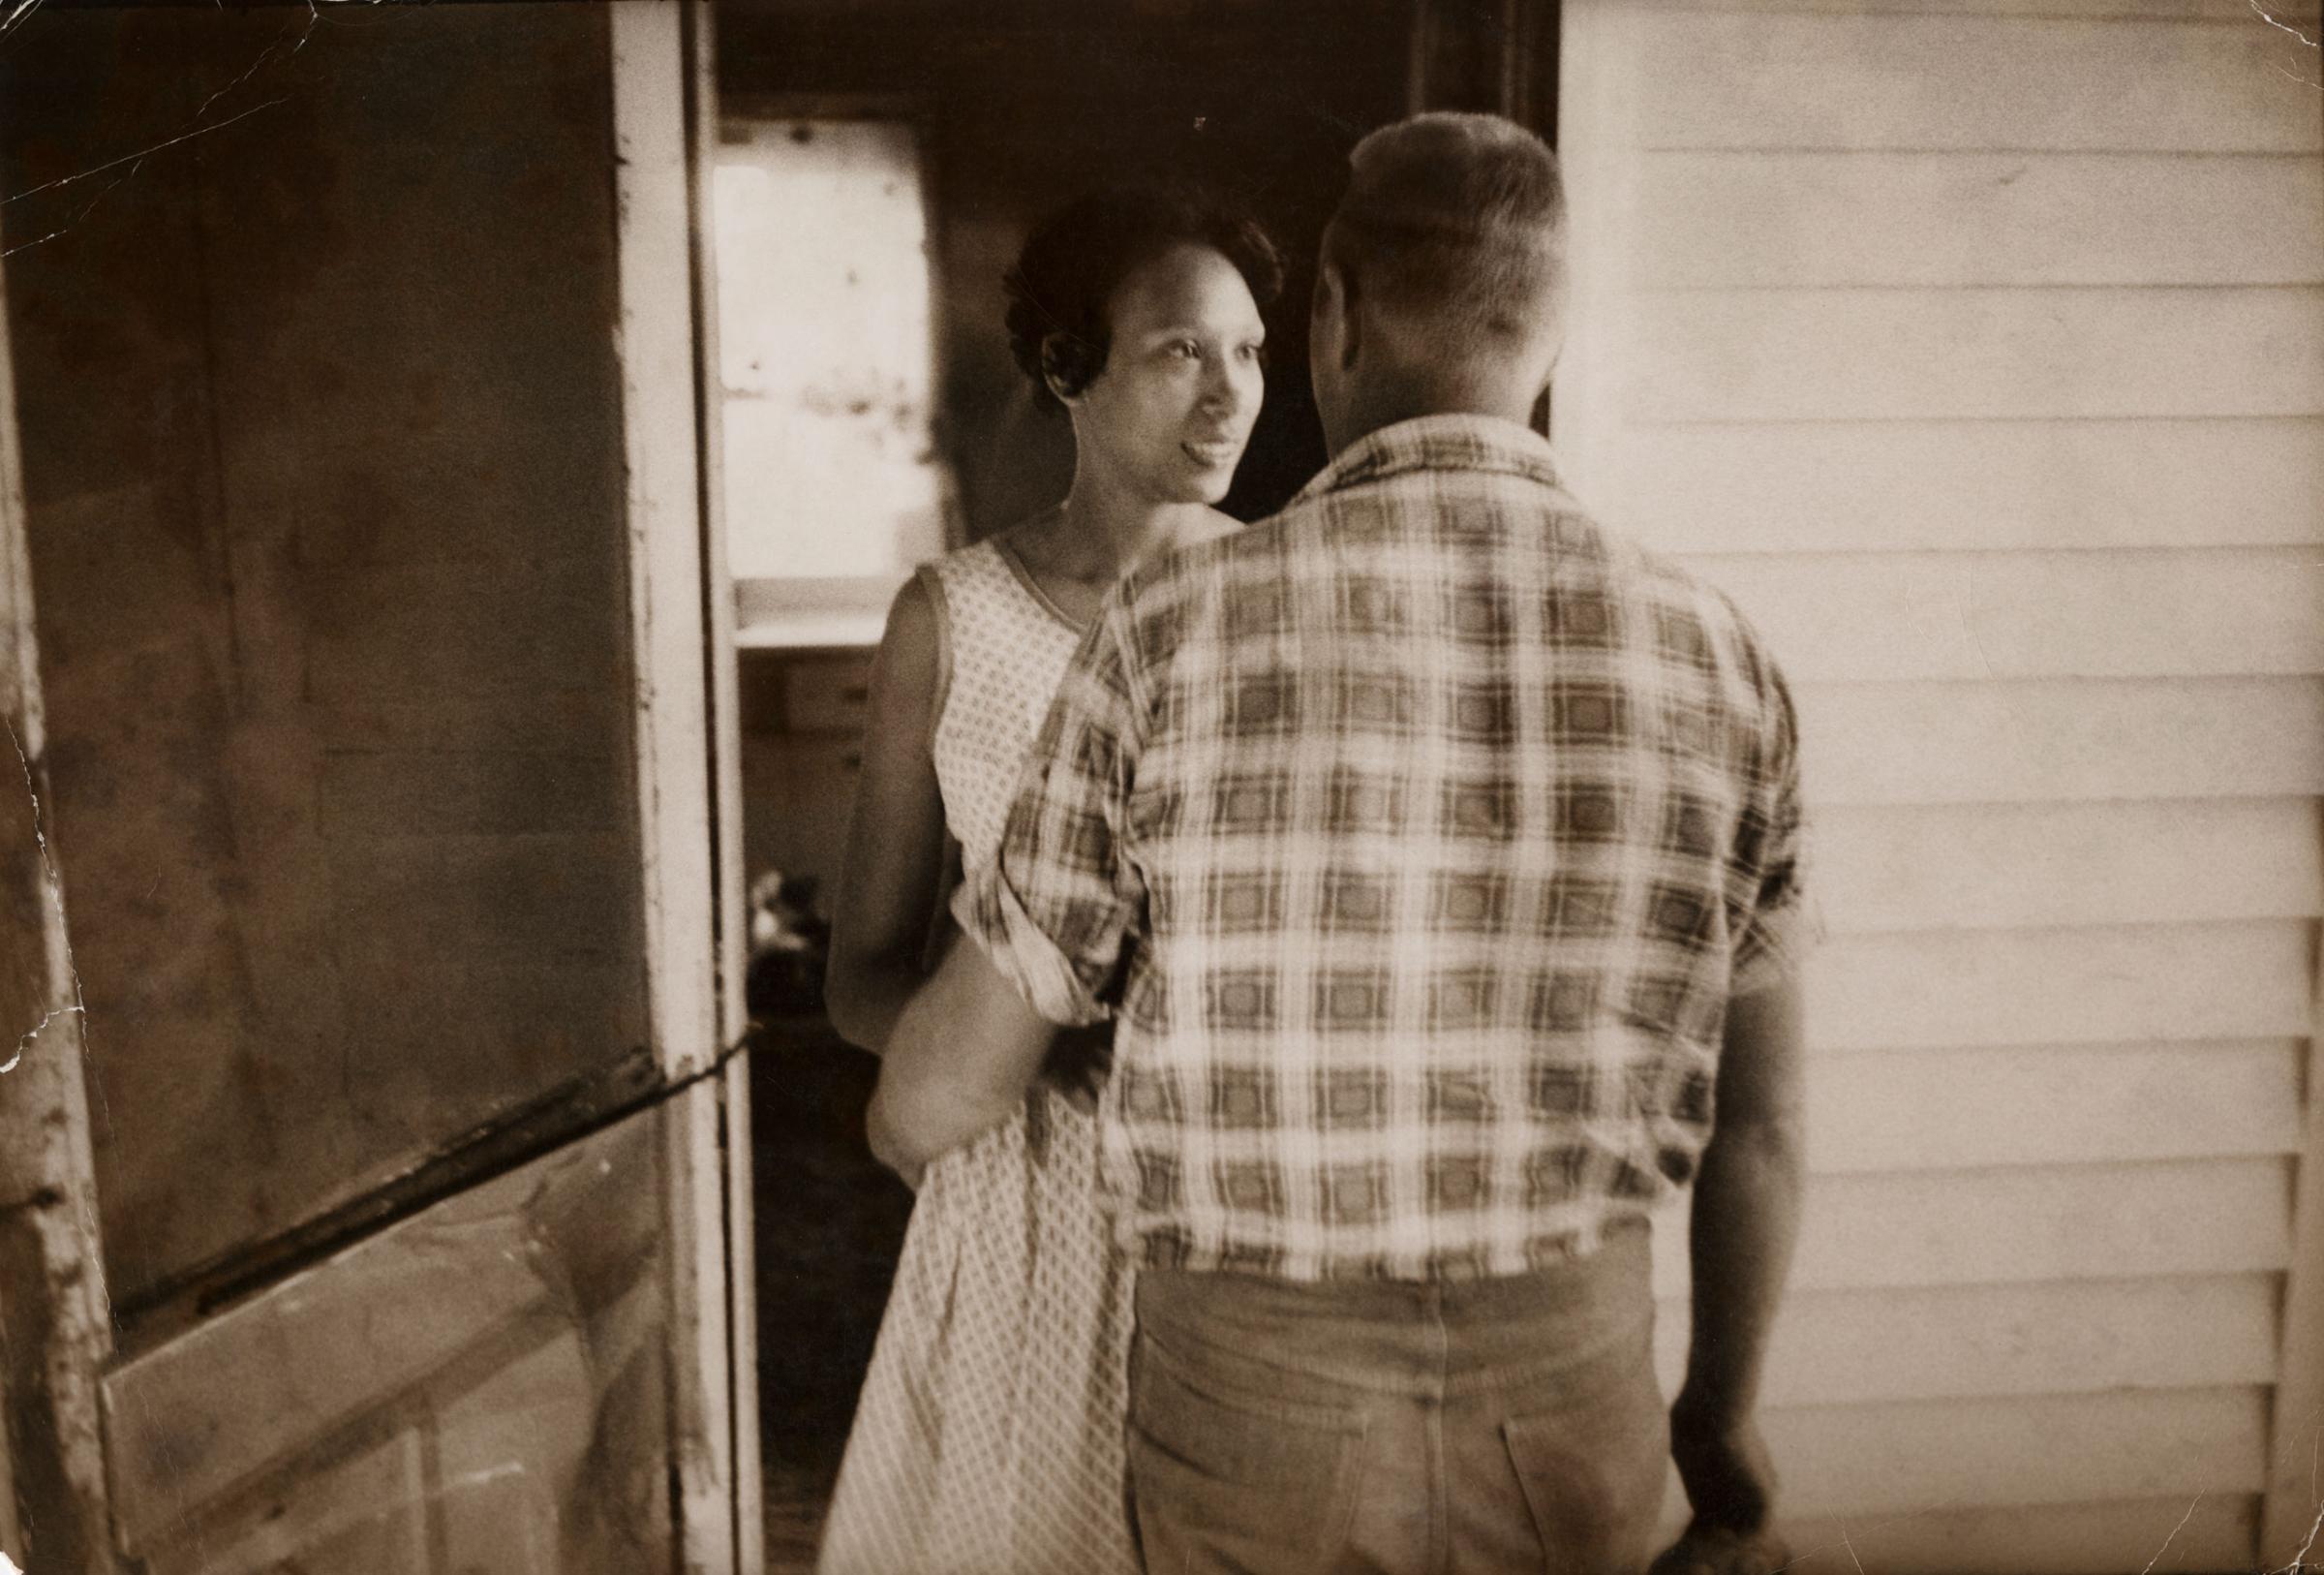 Mildred Loving greets her husband Richard on their front porch, King and Queen County, Virginia, April 1965.